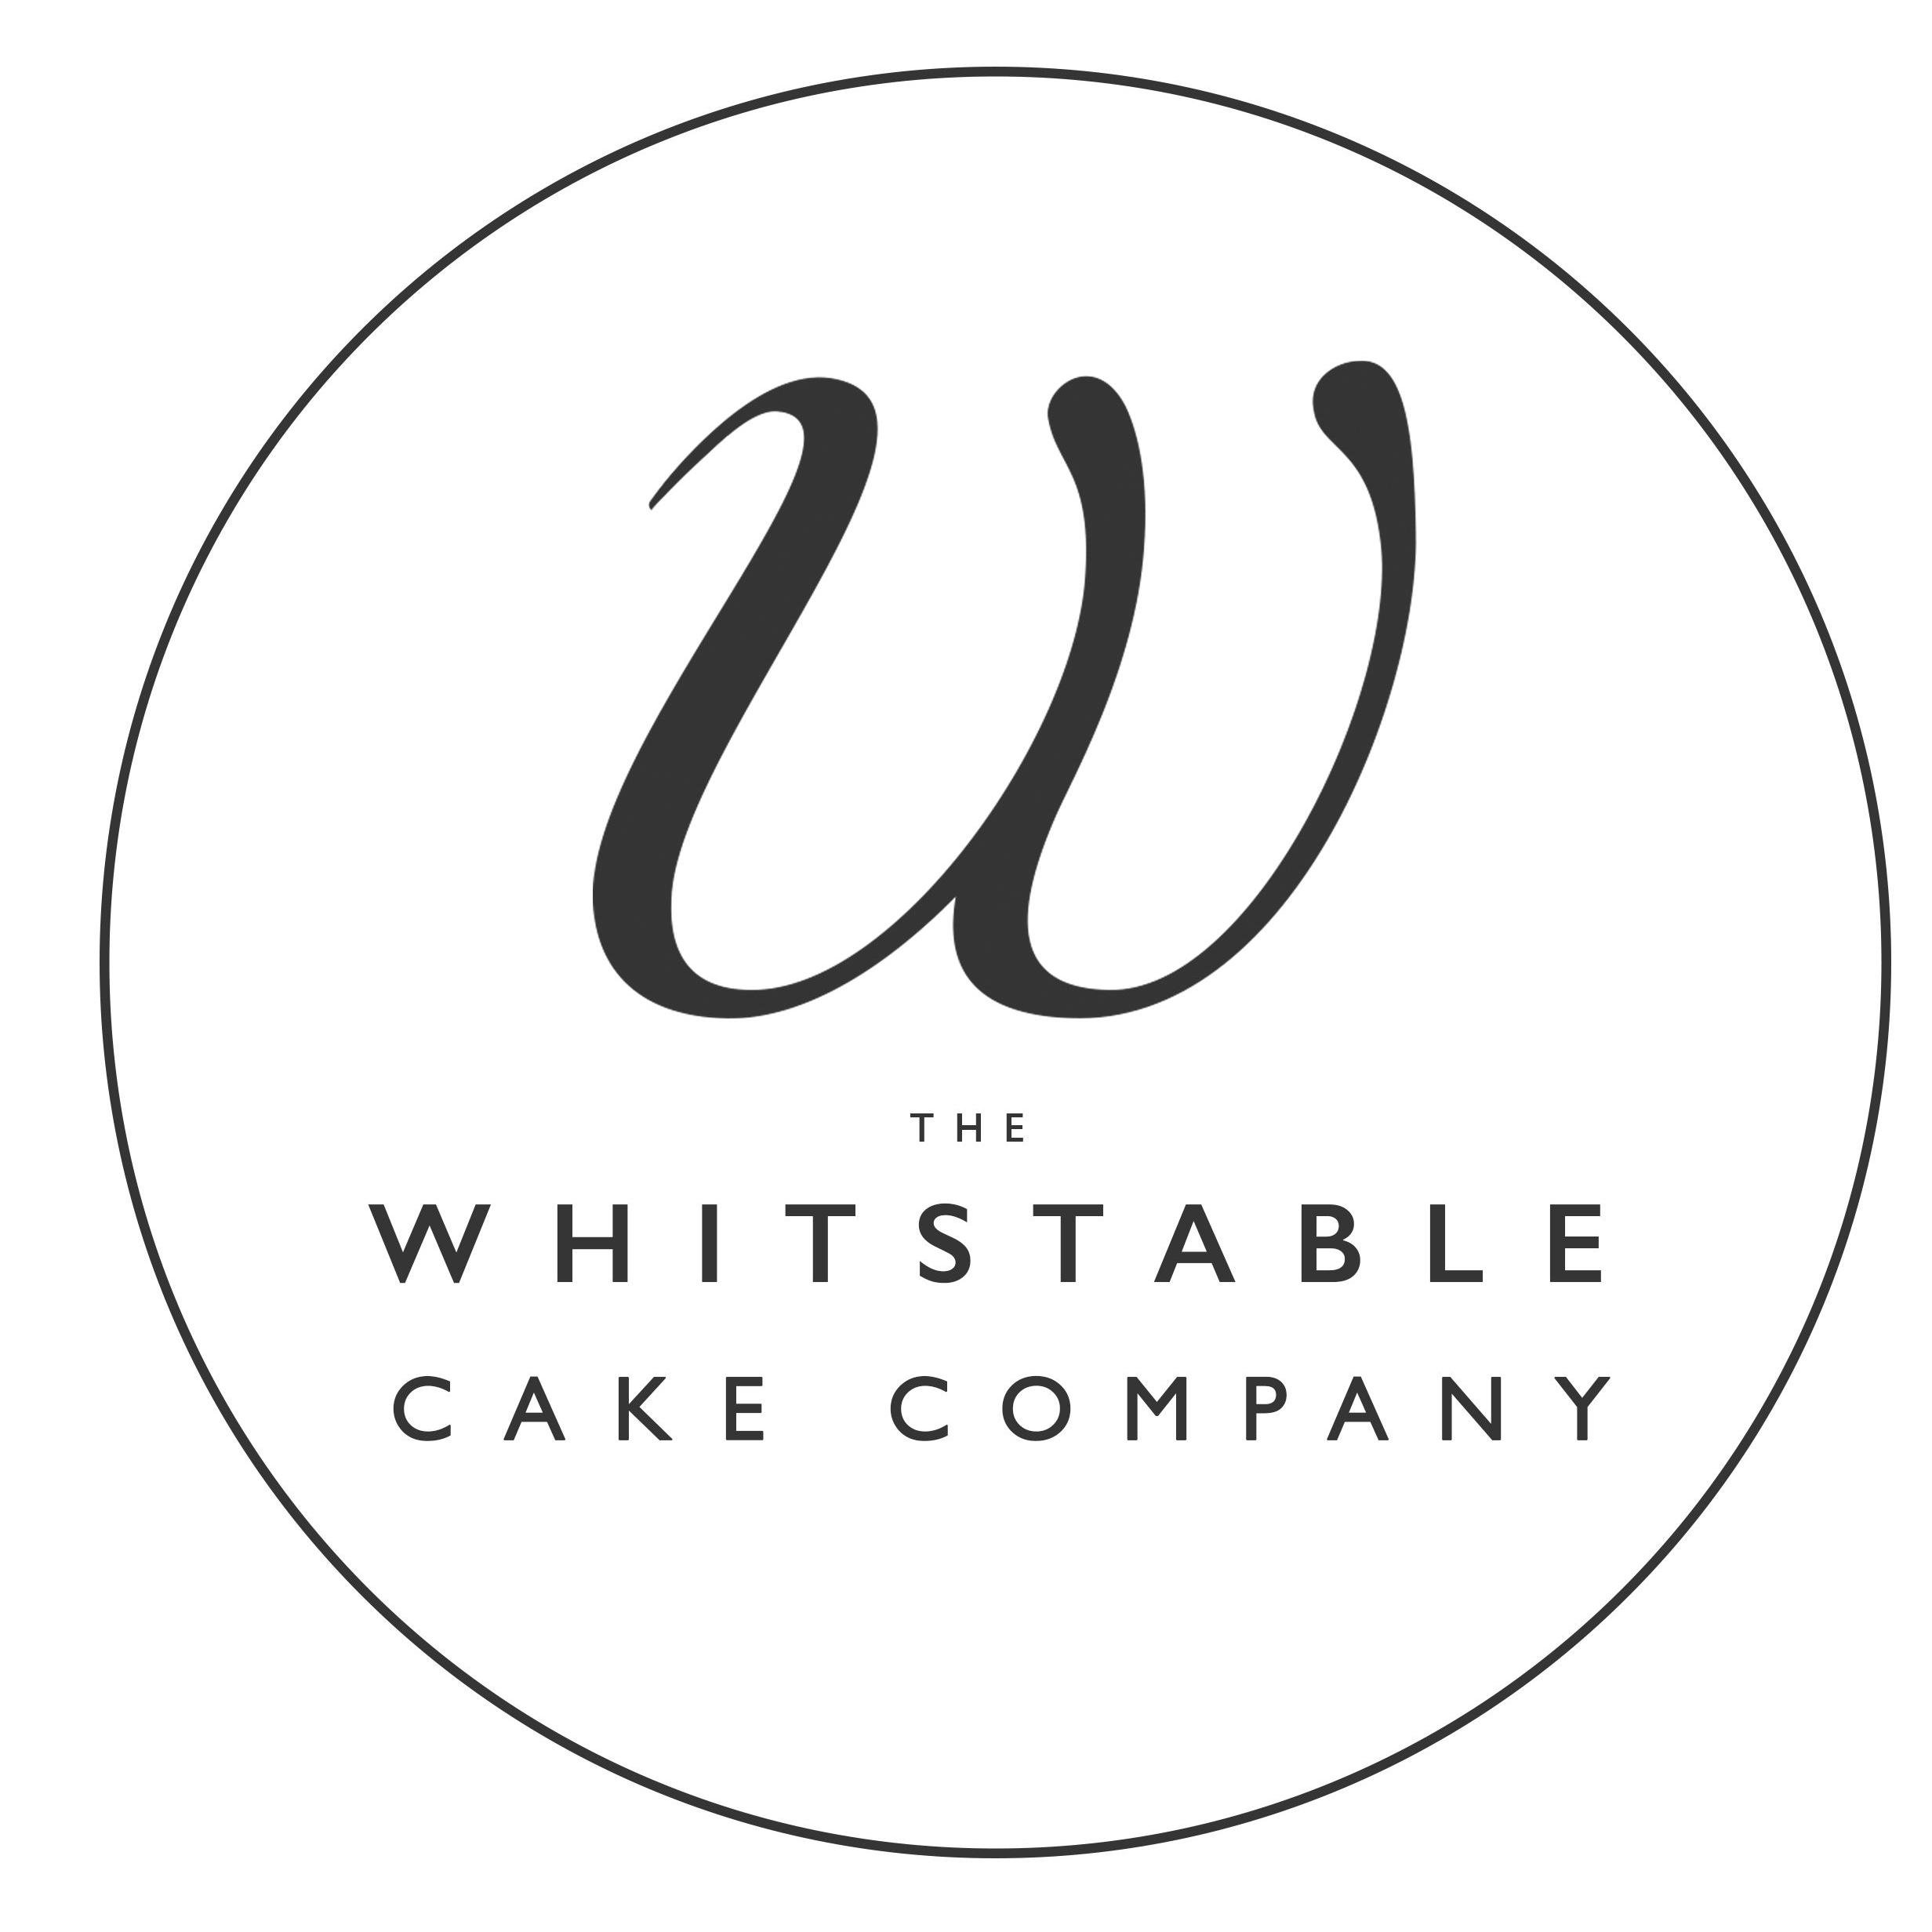 Bespoke cake decorator based in Whitstable, Kent.  Delivers throughout the South East, including London.
http://t.co/8wiAP8w005